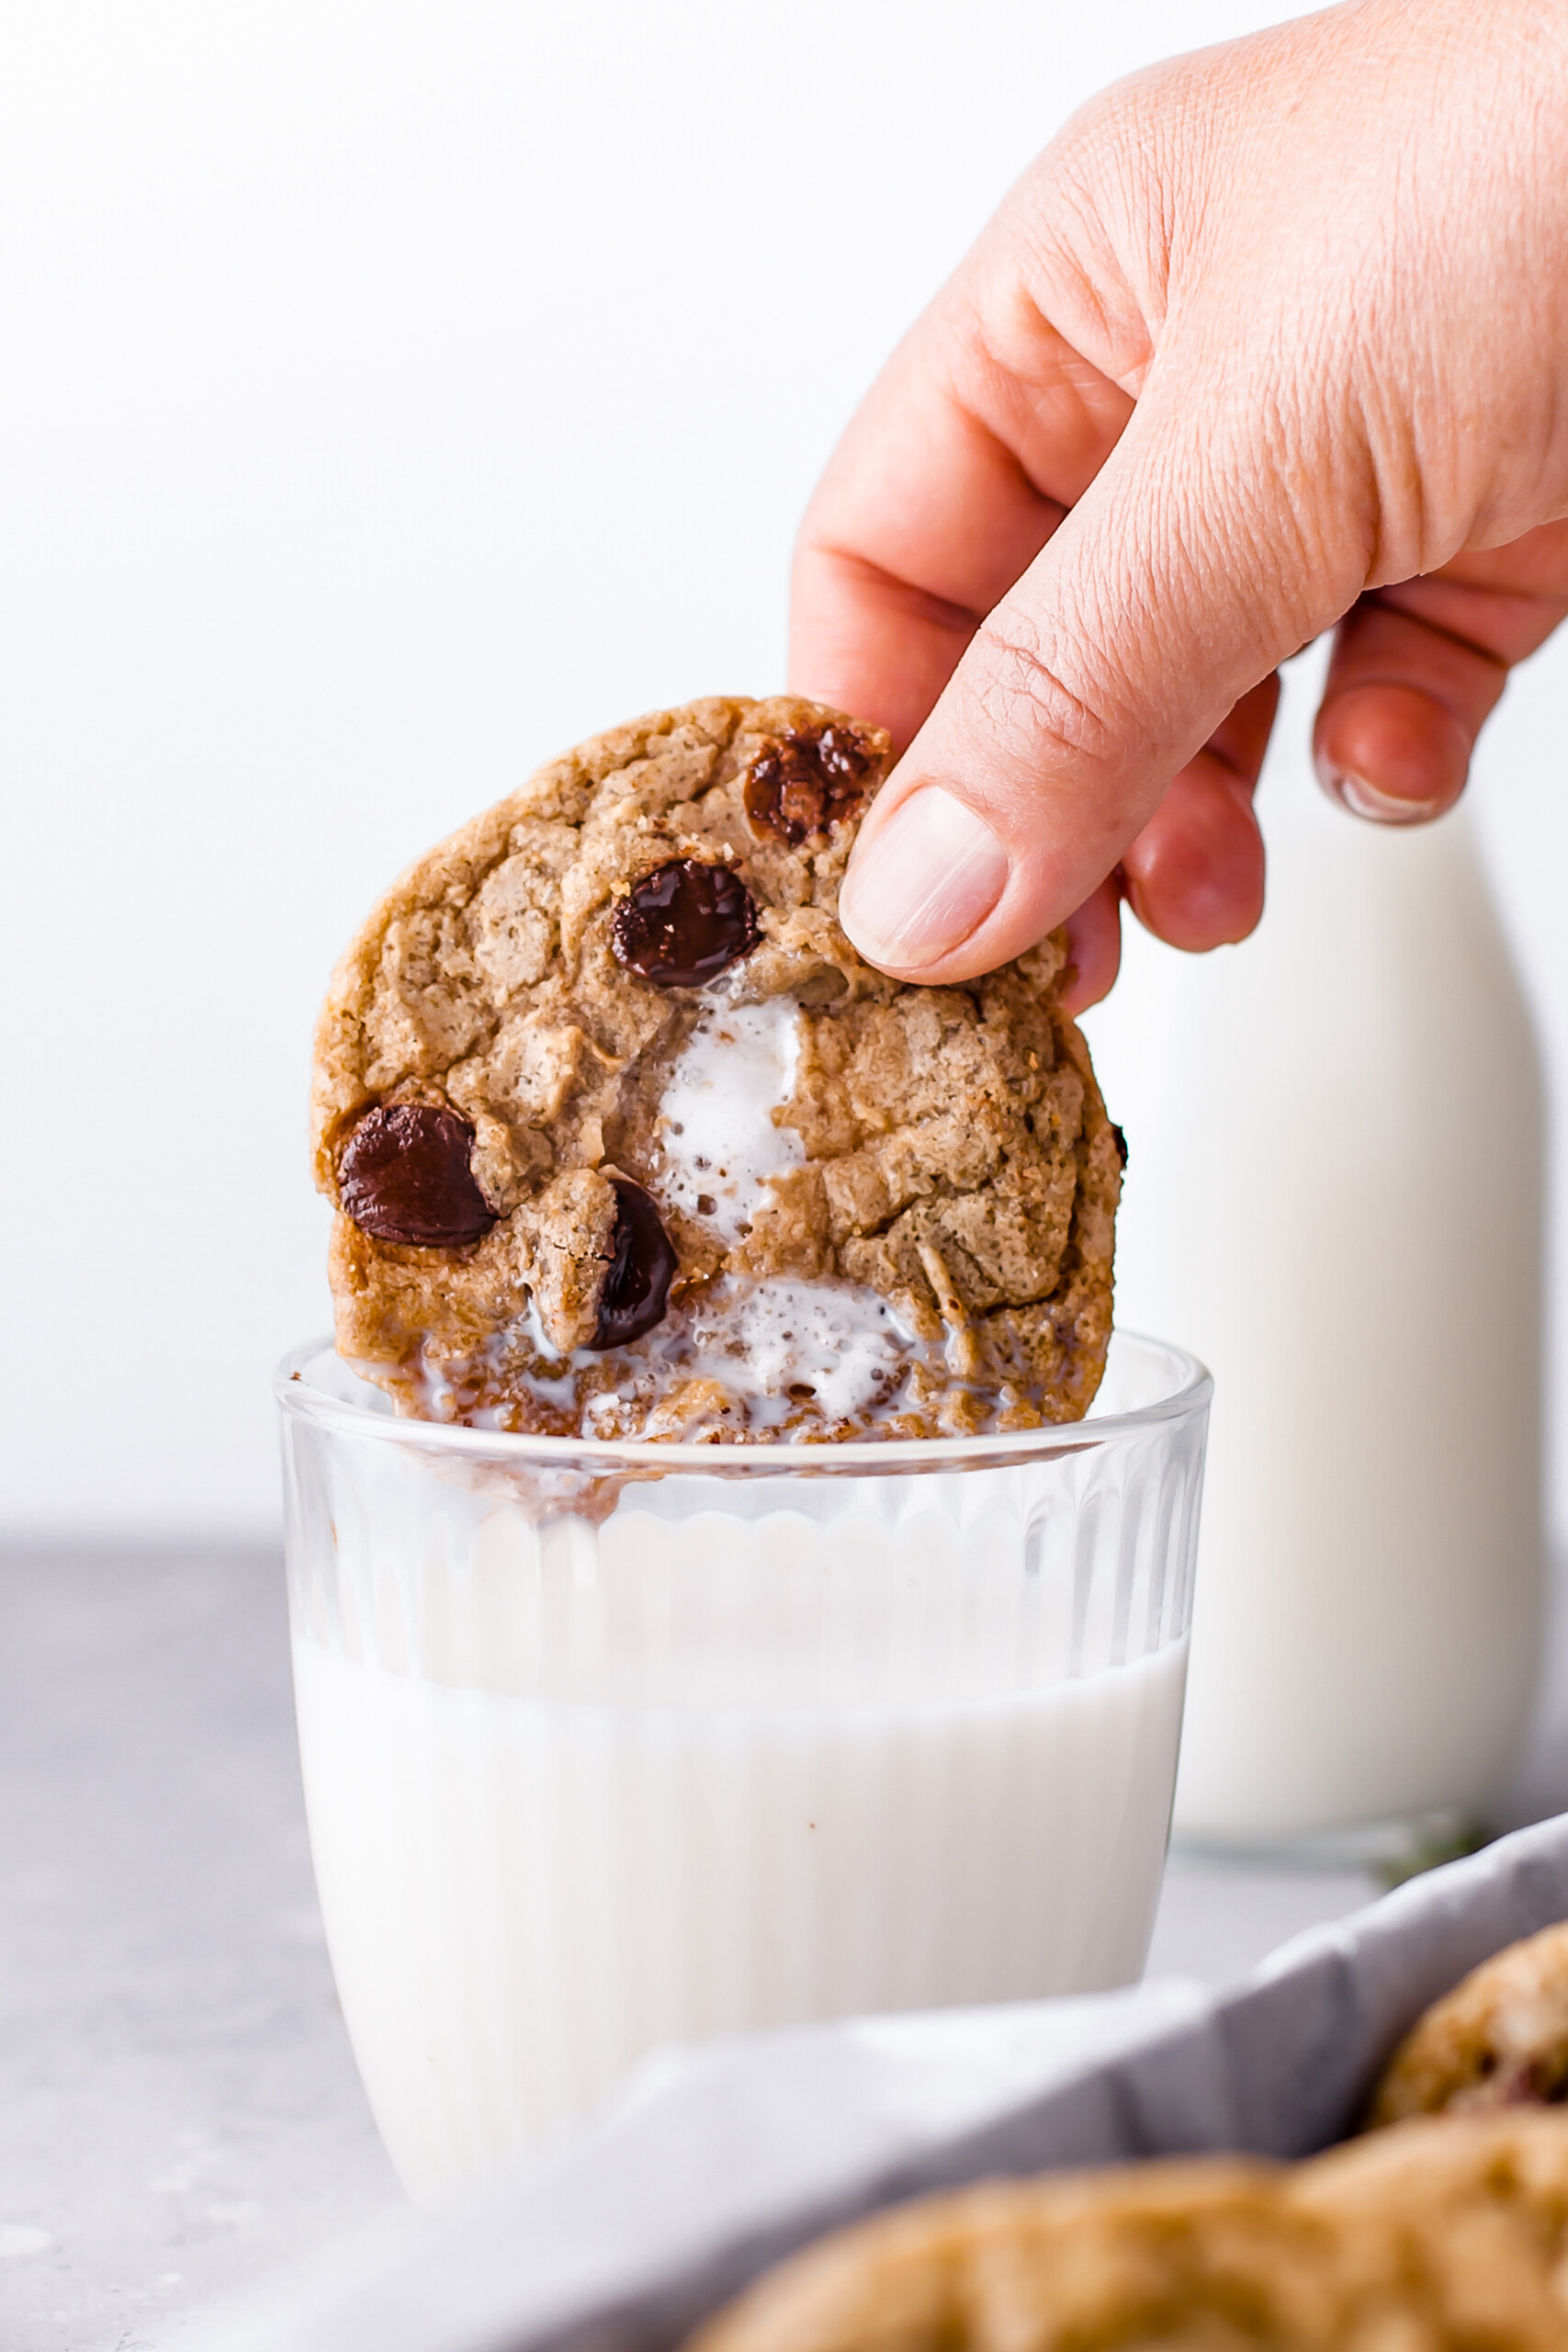 A woman's hand dipping a chocolate chip marshmallow cookie in a glass of milk.